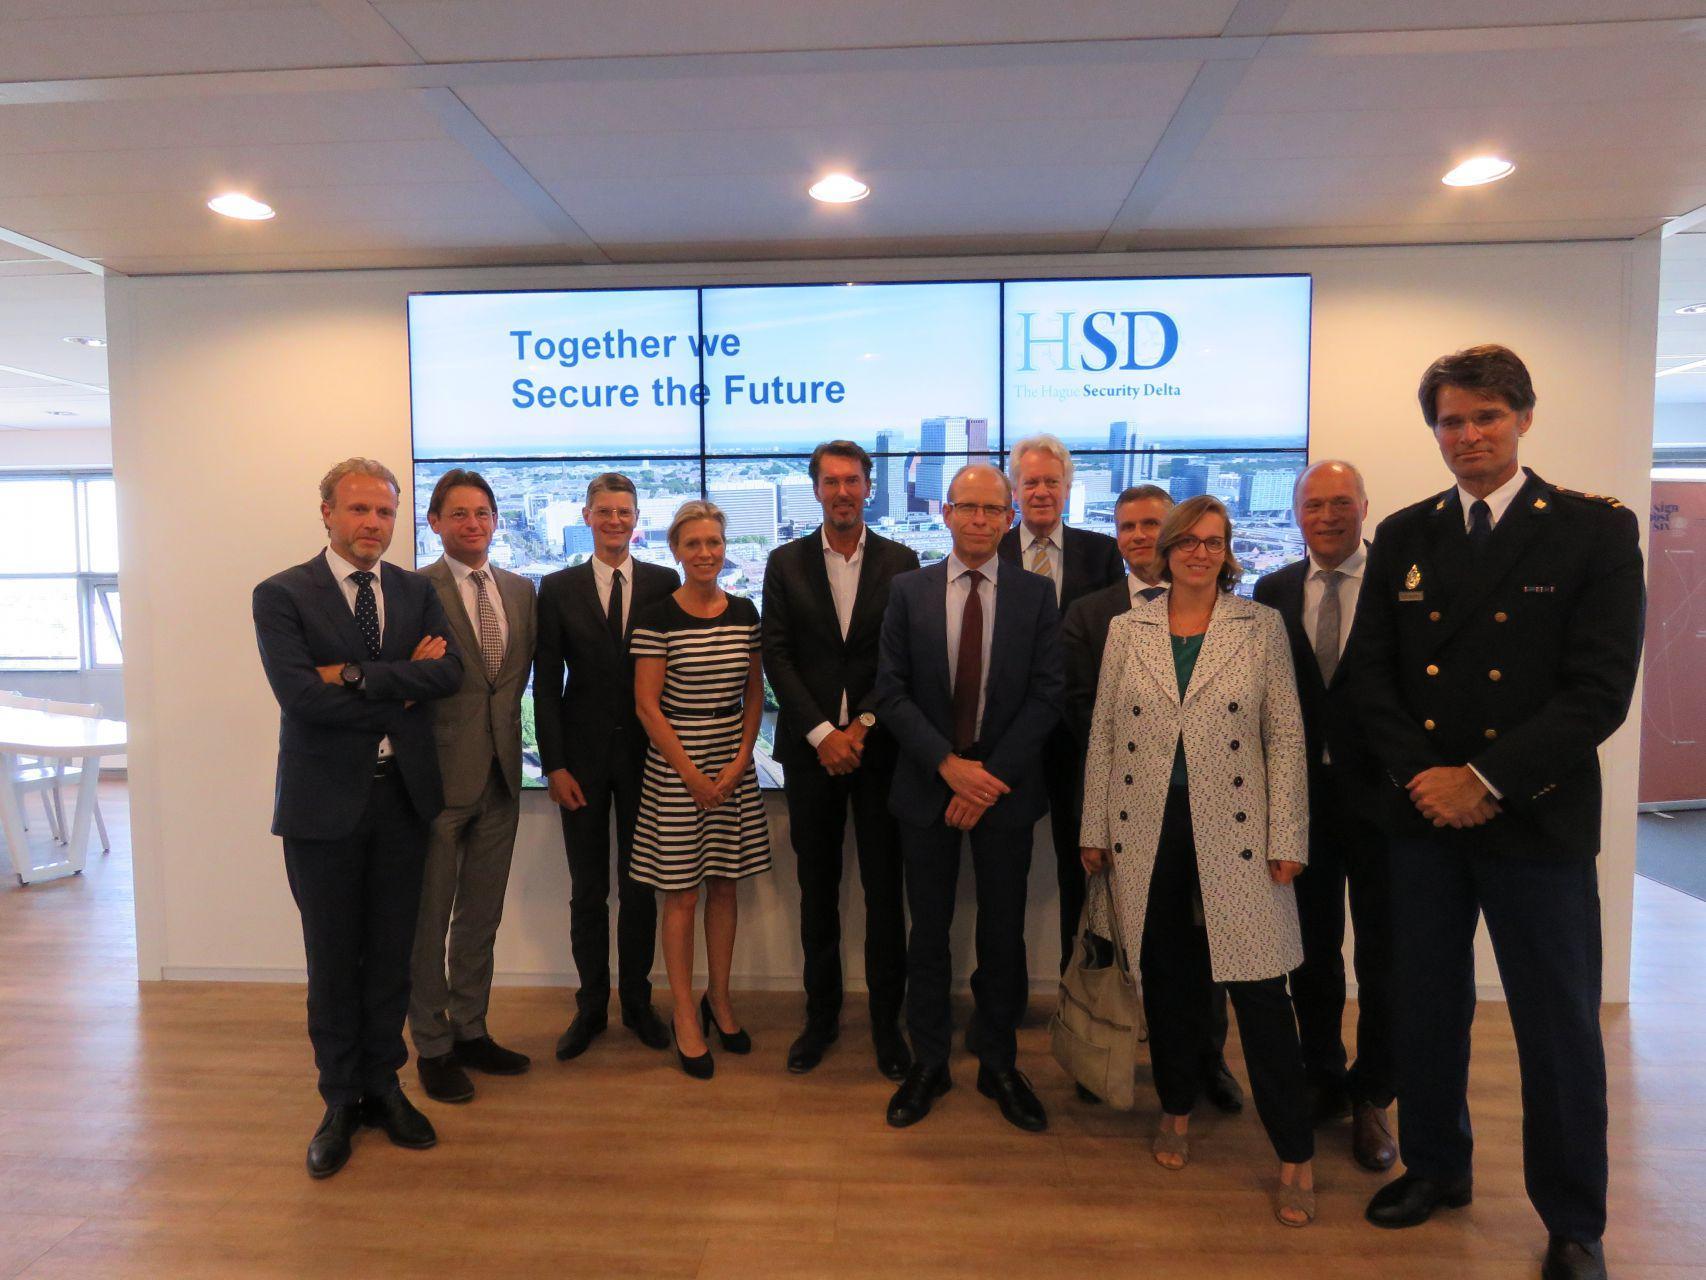 Visit Criminal Justice Chain to The Hague Security Delta